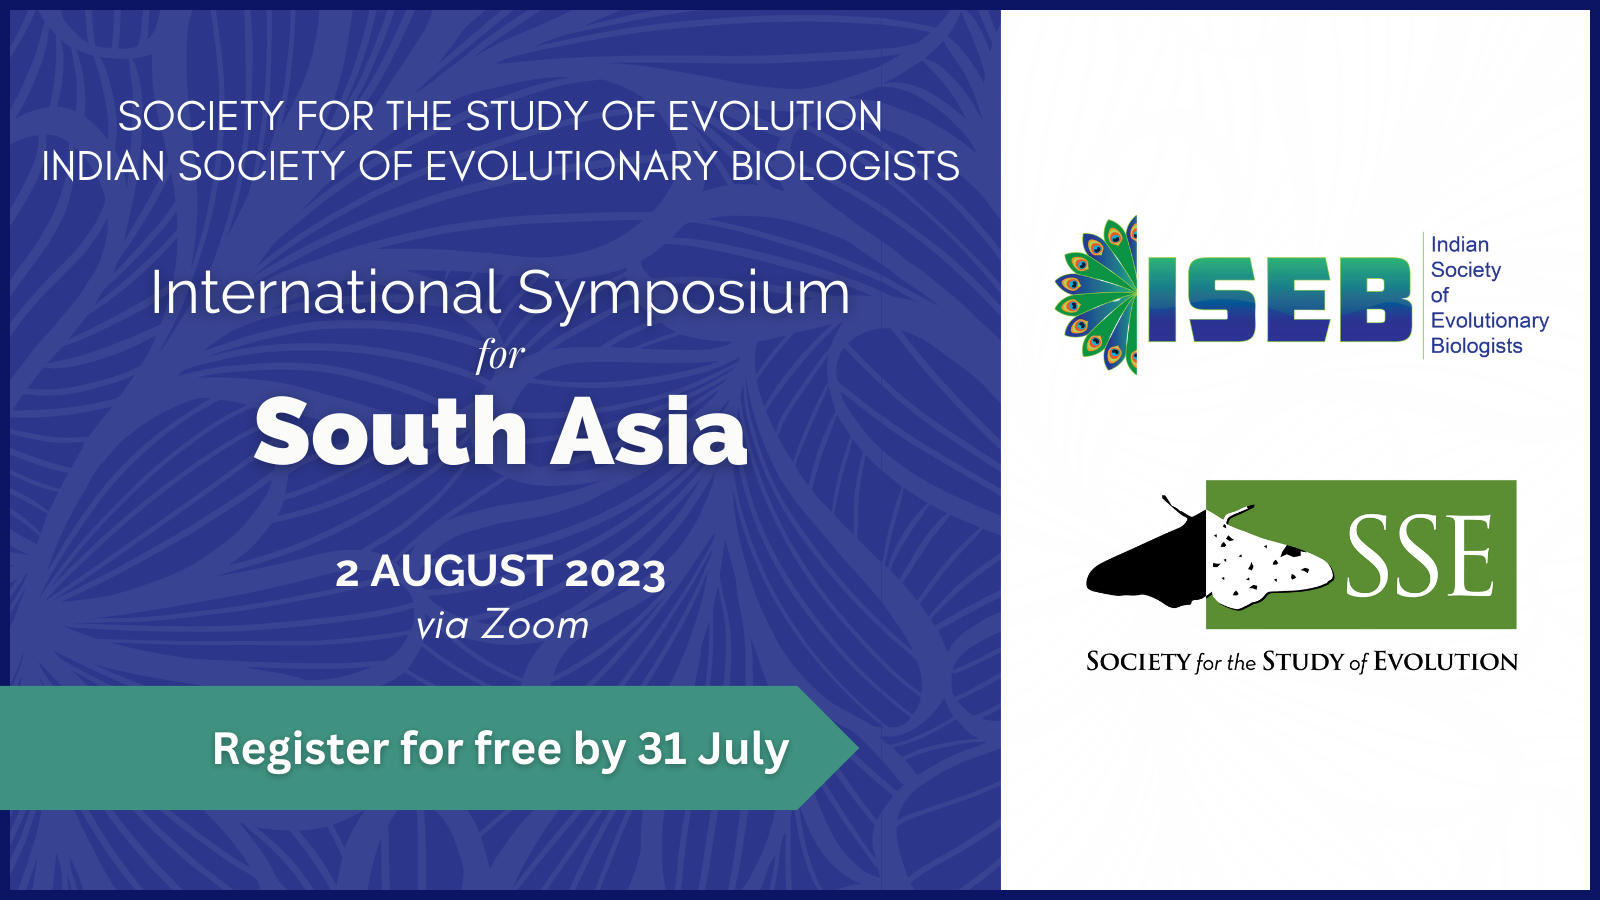 Text: Society for the Study of Evolution, Indian Society of Evolutionary Biologists, International Symposium for South Asia, 2 August 2023 via Zoom, Register for free by 31 July. Logos for the Indian Society of Evolutionary Biologists and the Society for the Study of Evolution.